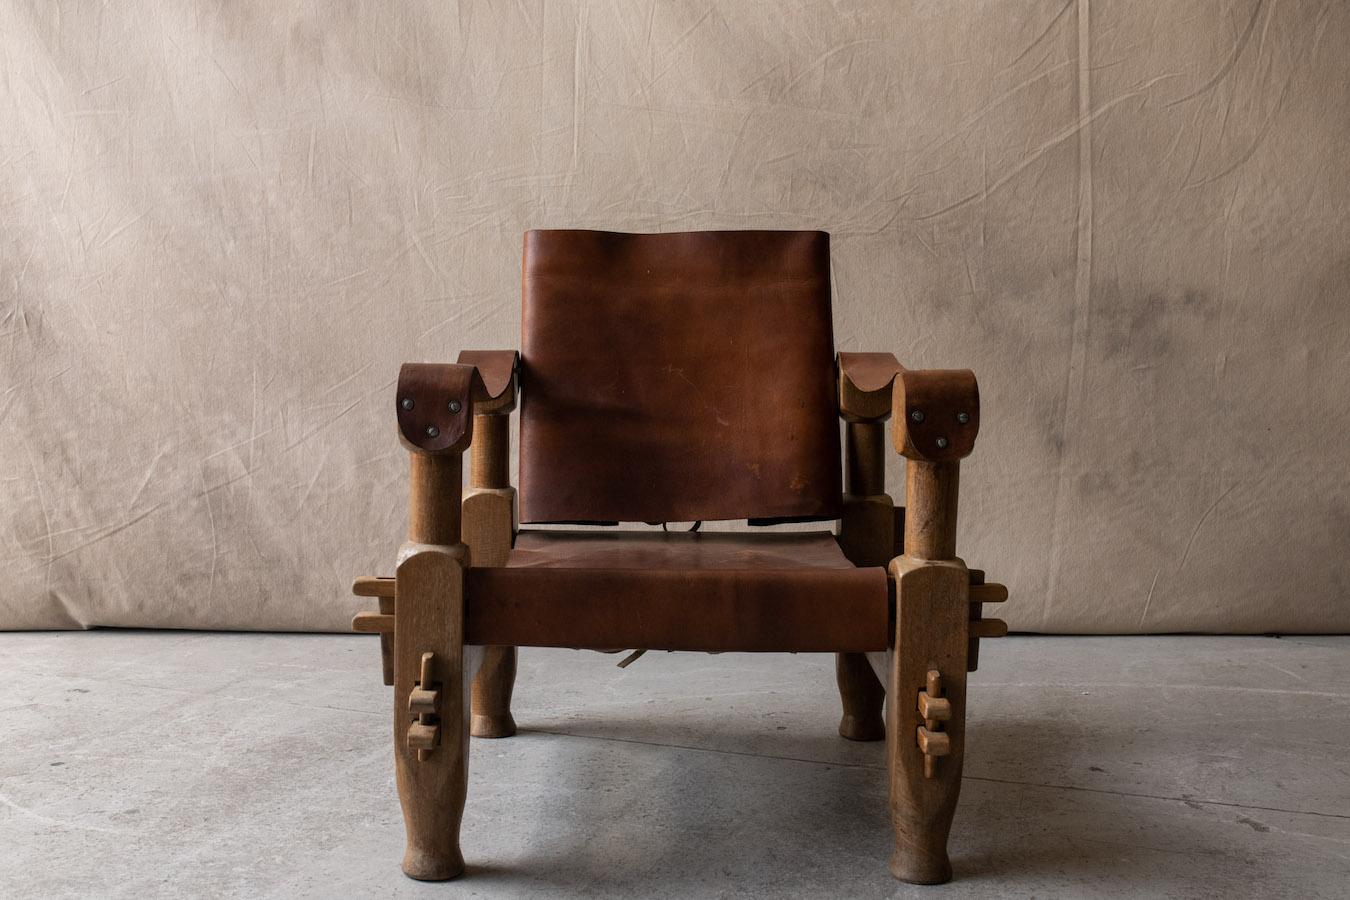 Vintage leather lounge chair from Brazil, circa 1960.  Solid wood construction stretched with thick saddle leather.  Light wear and use.

We don't have the time to write an extensive description on each of our pieces. We prefer to speak directly